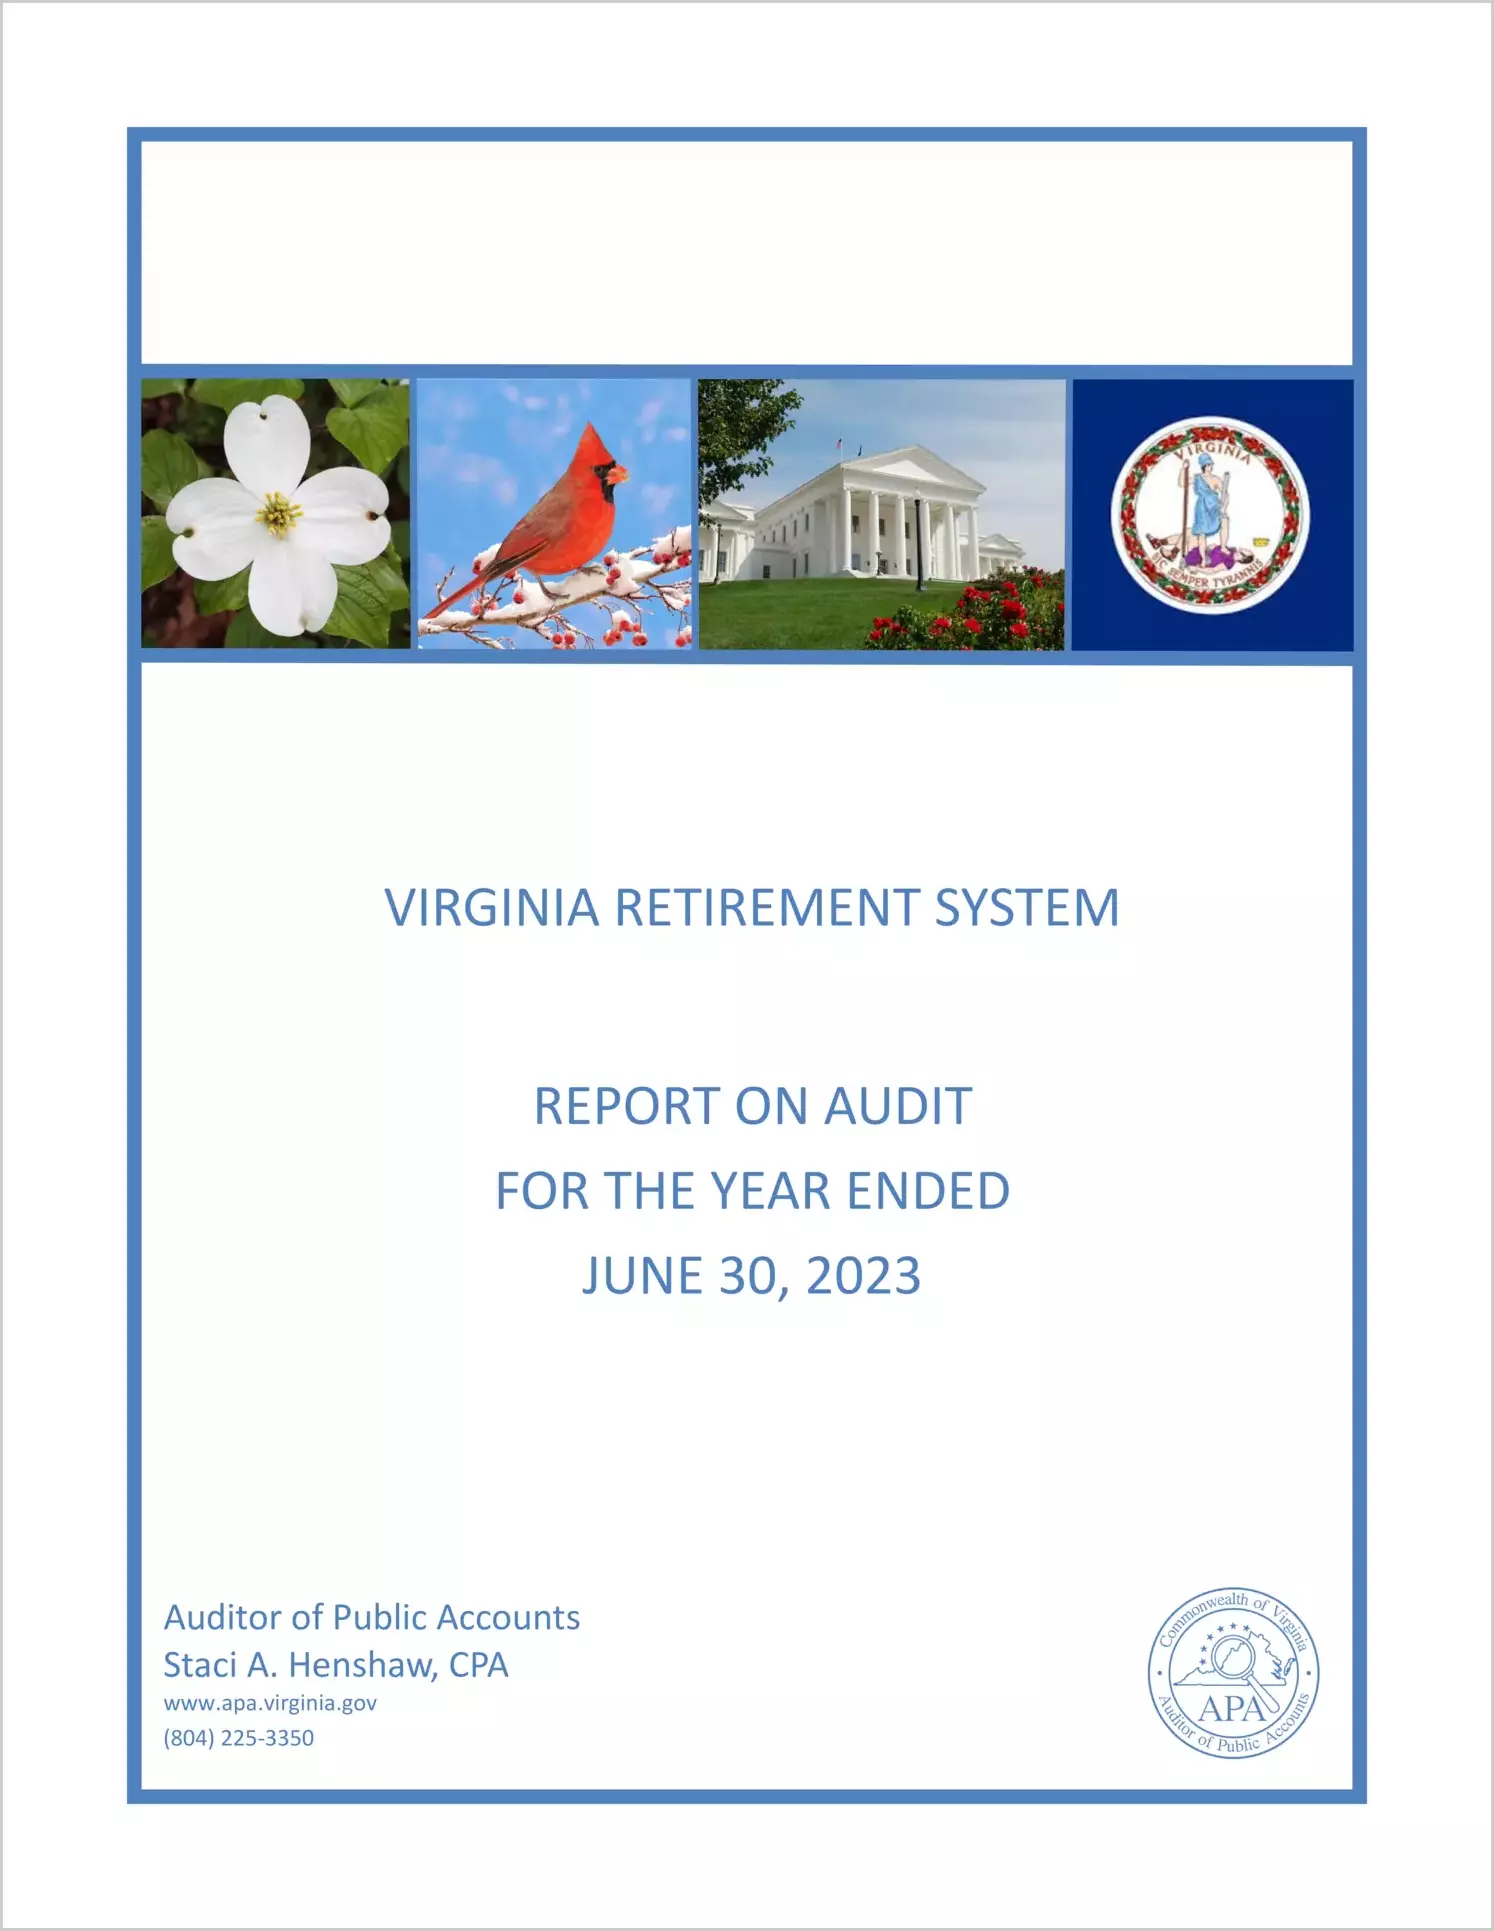 Virginia Retirement System for the year ended June 30, 2023